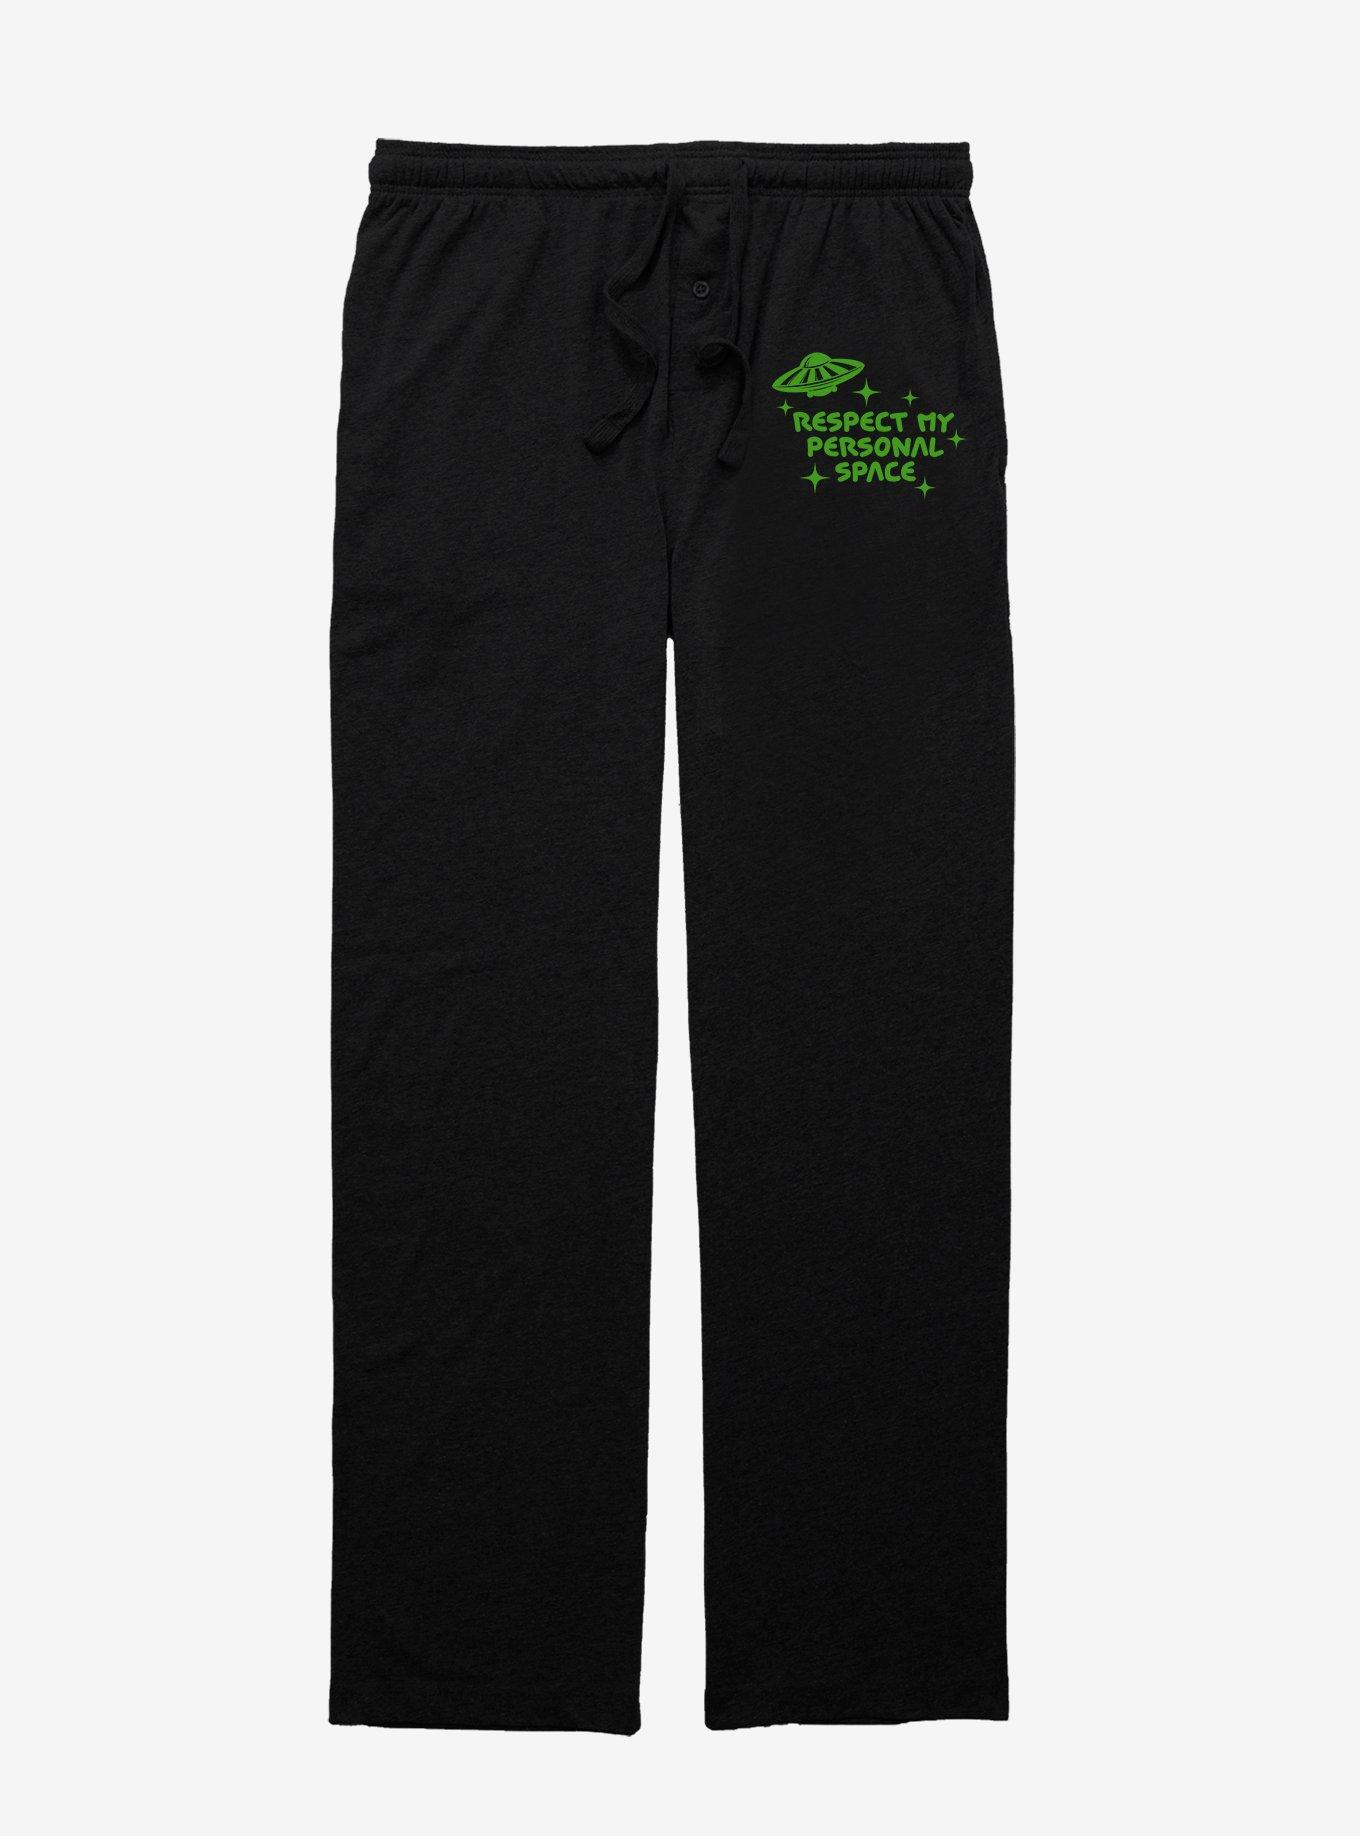 Cozy Collection Respect My Personal Space Pajama Pants, BLACK, hi-res